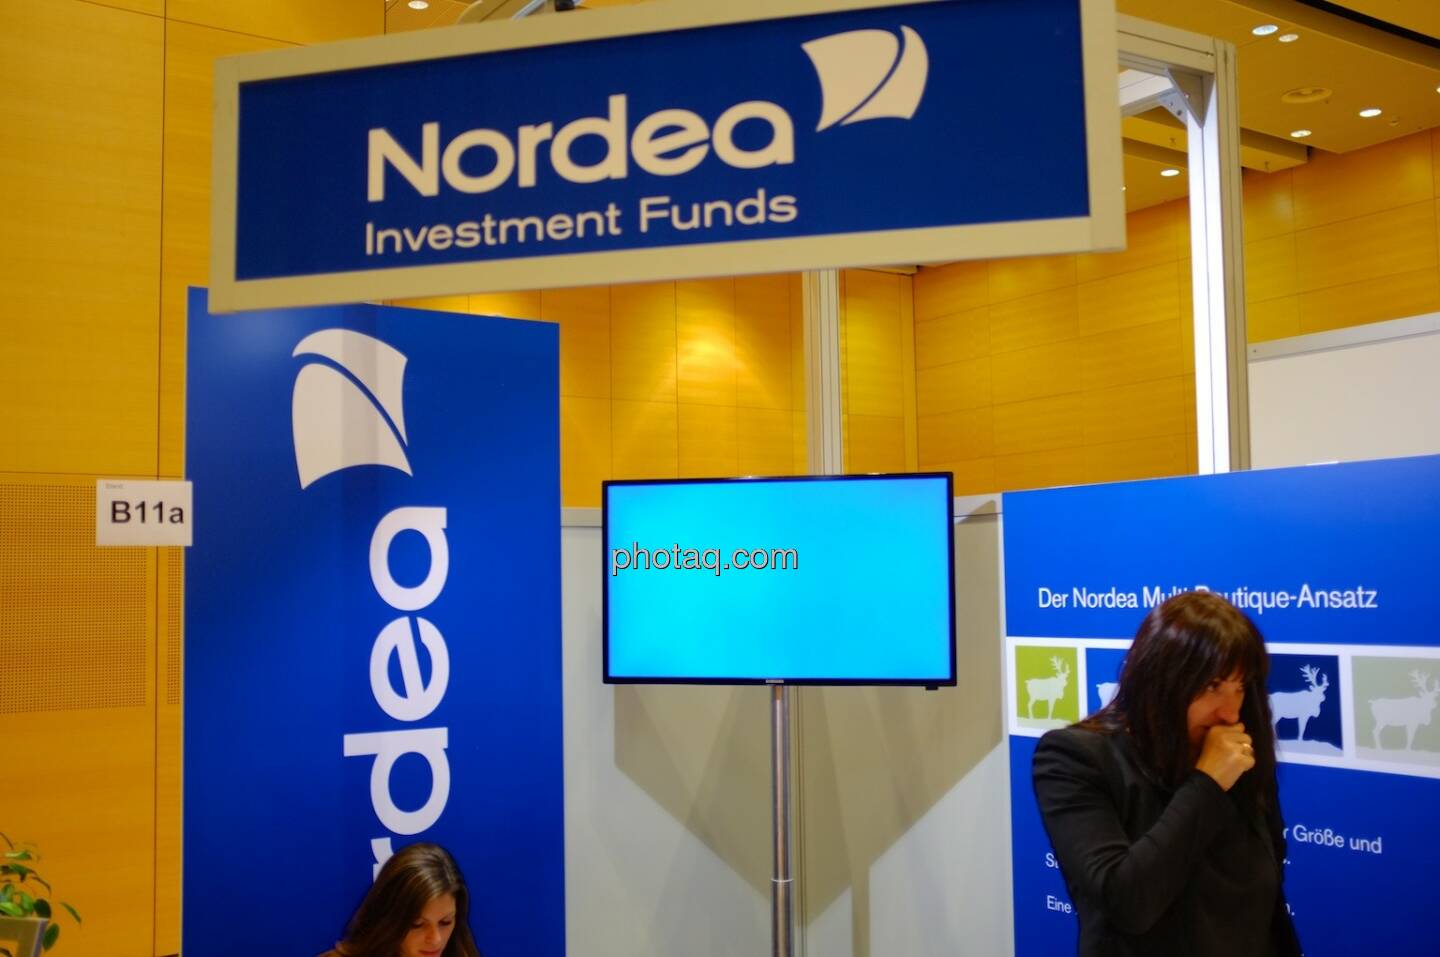 Nordea Investment Funds